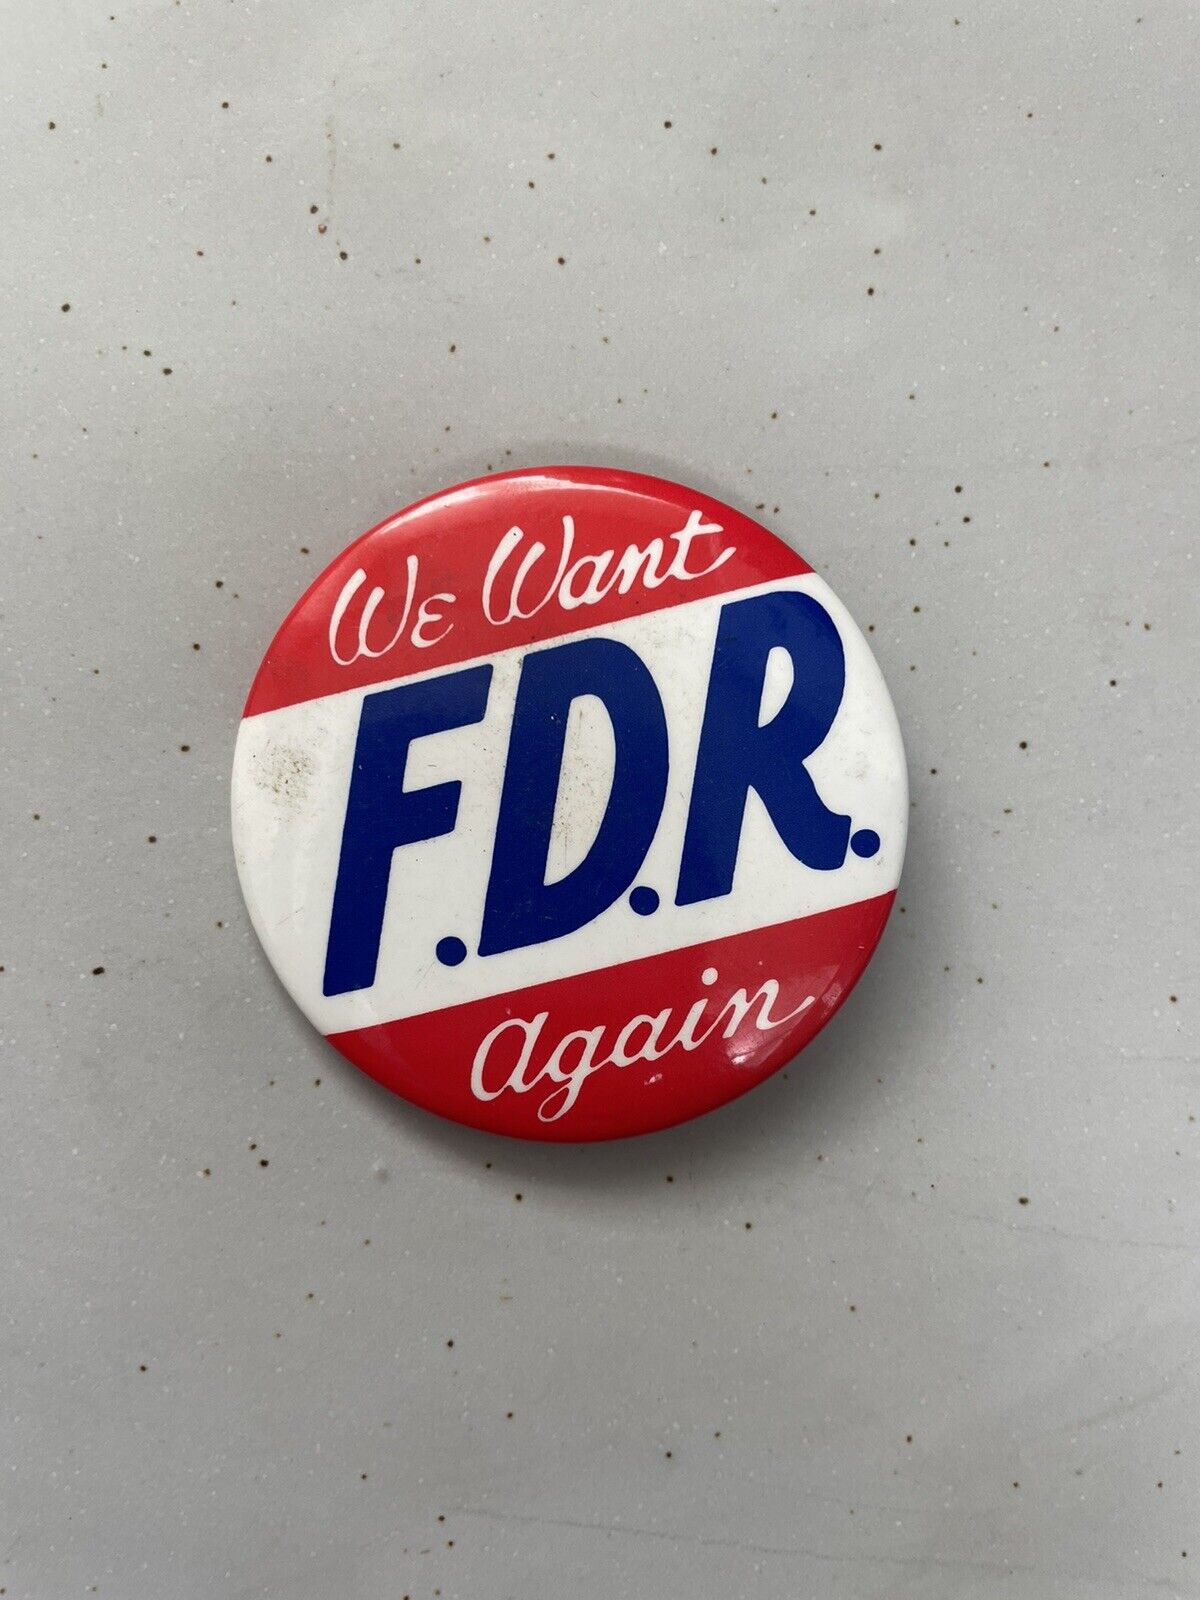 1936 We Want FDR Again Franklin D Roosevelt Campaign Pin Button — Large